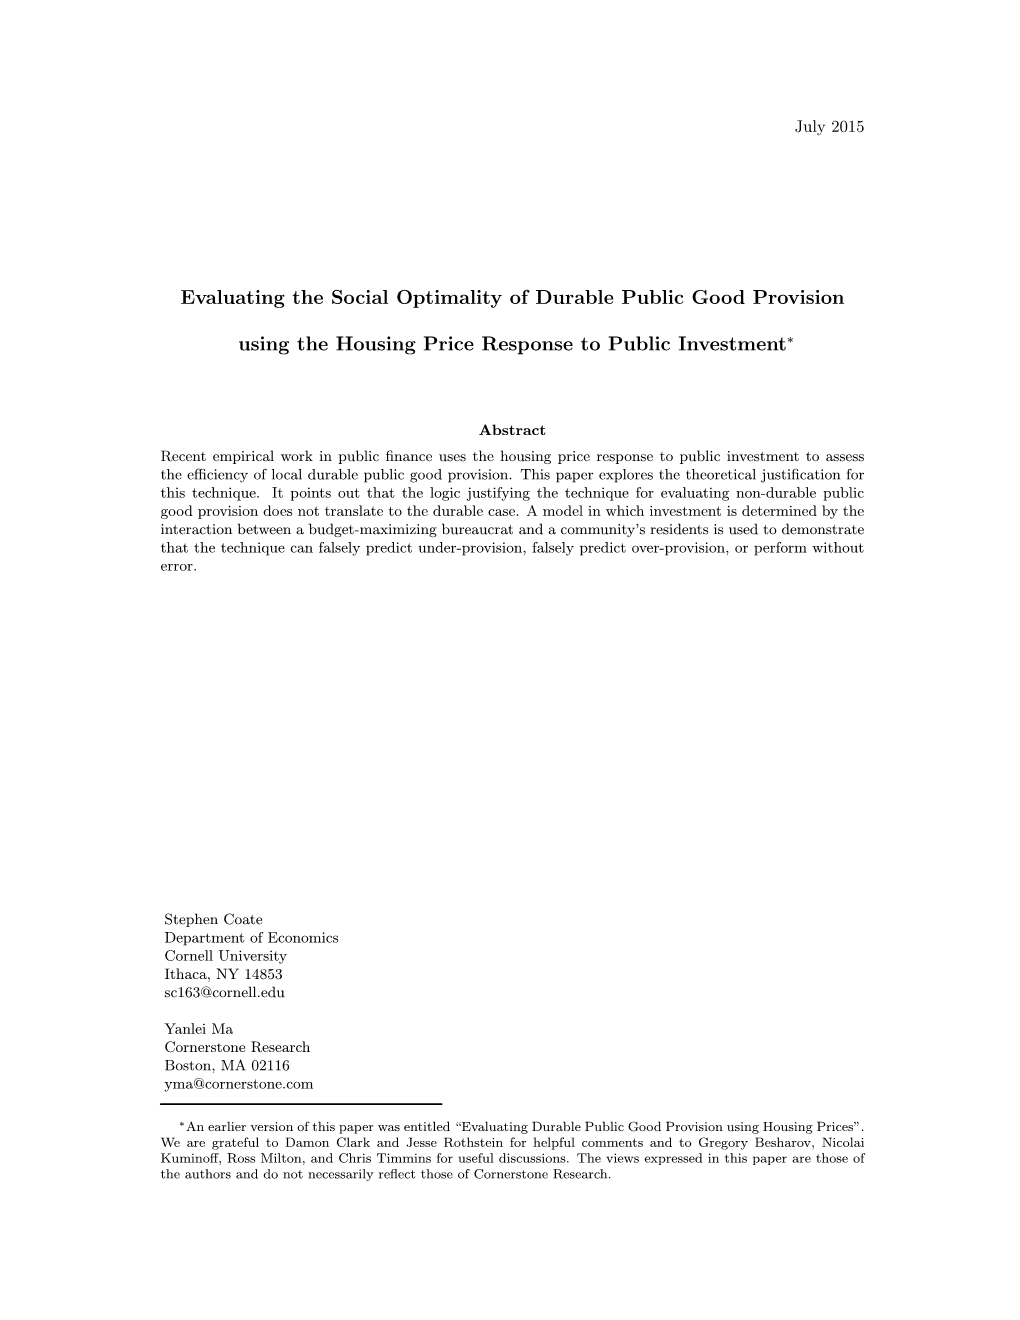 Evaluating the Social Optimality of Durable Public Good Provision